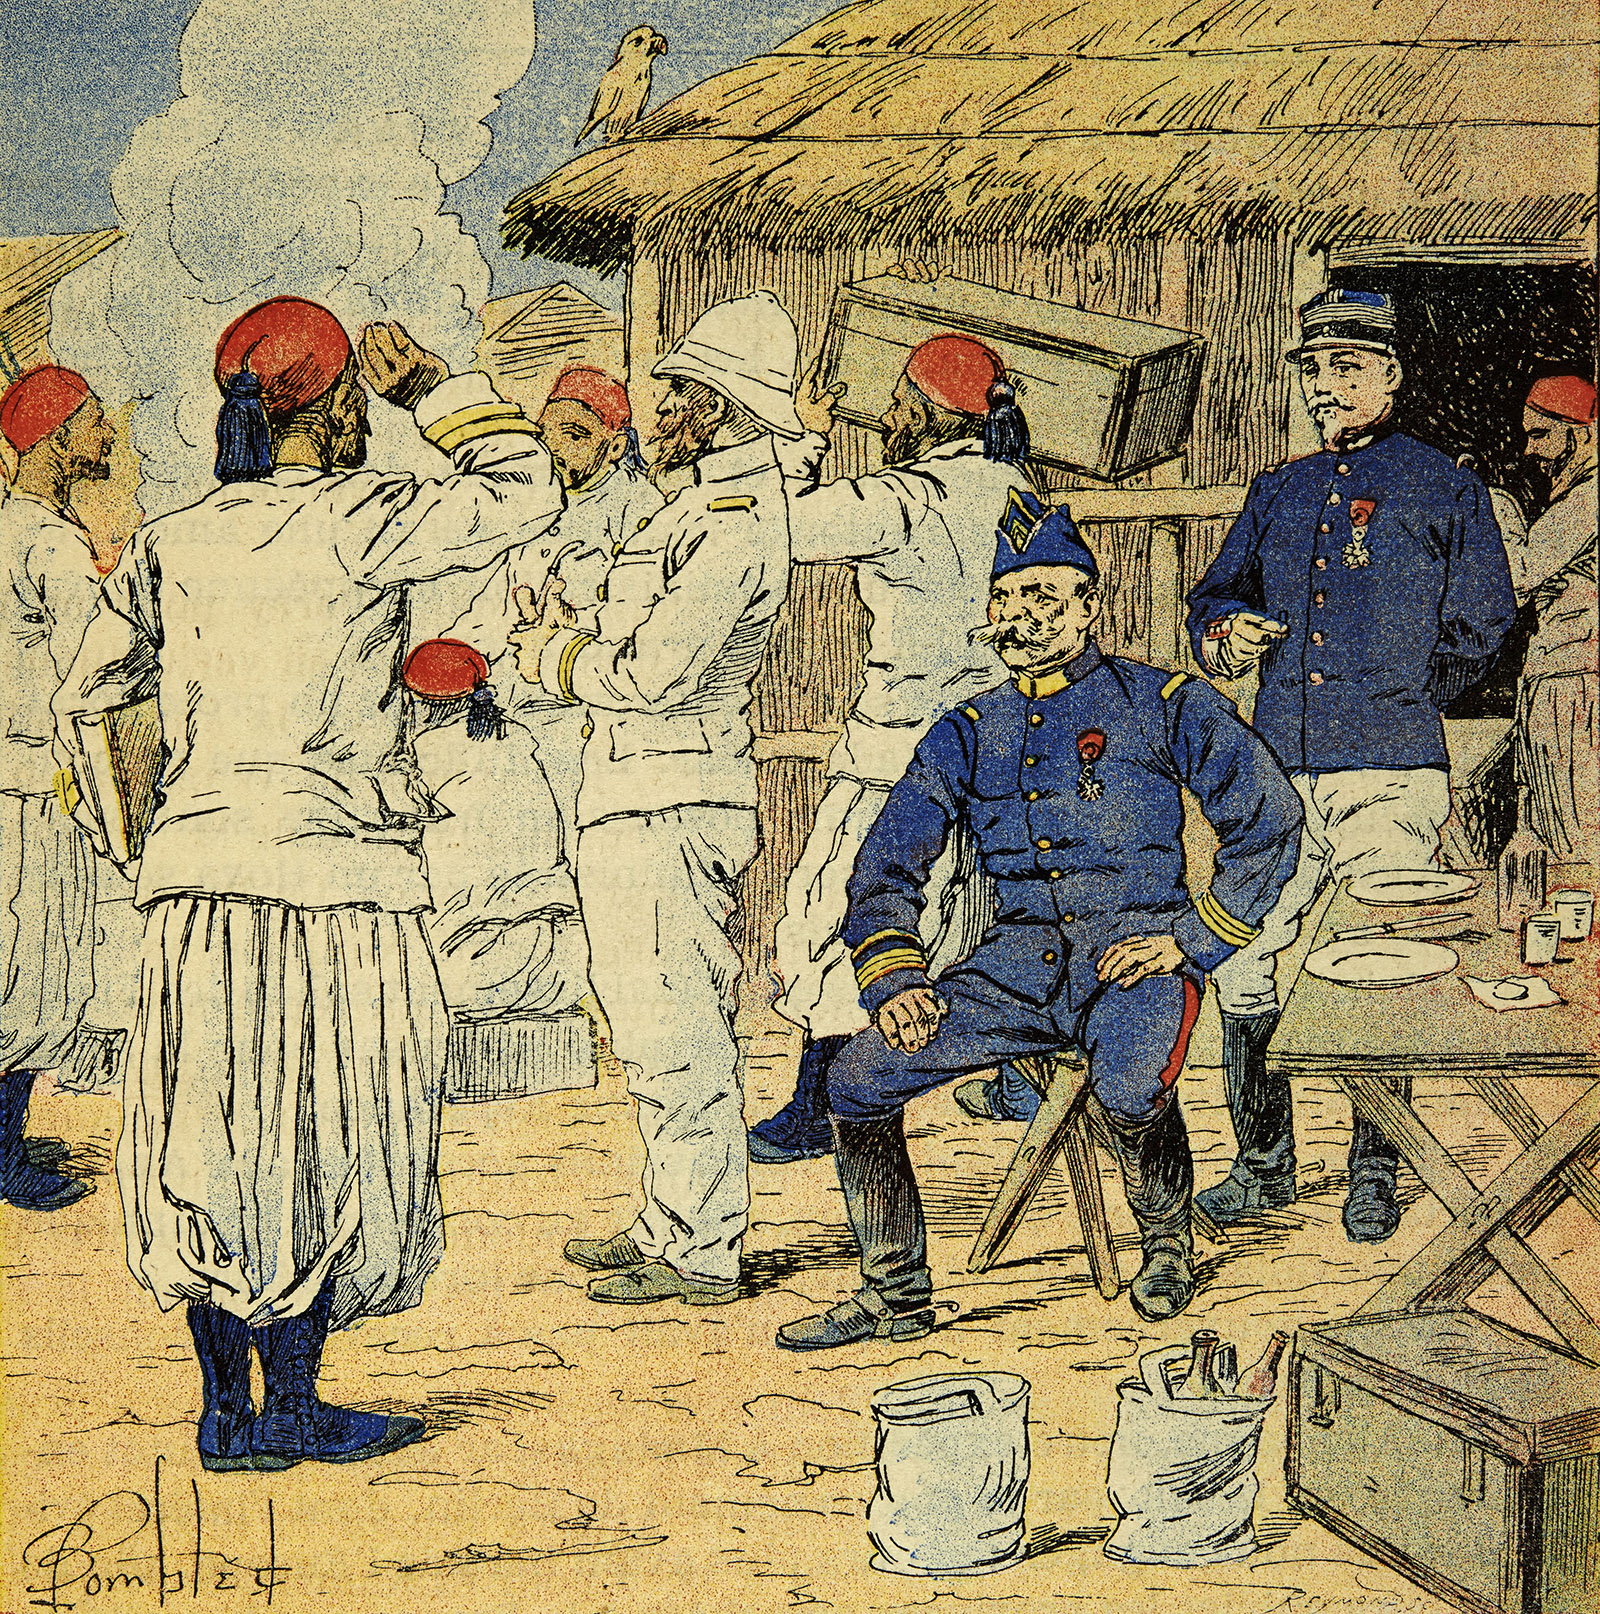 Book illustration by Louis Bombled showing the Algerian regiment’s quarters during the French campaign in Madagascar, 1895